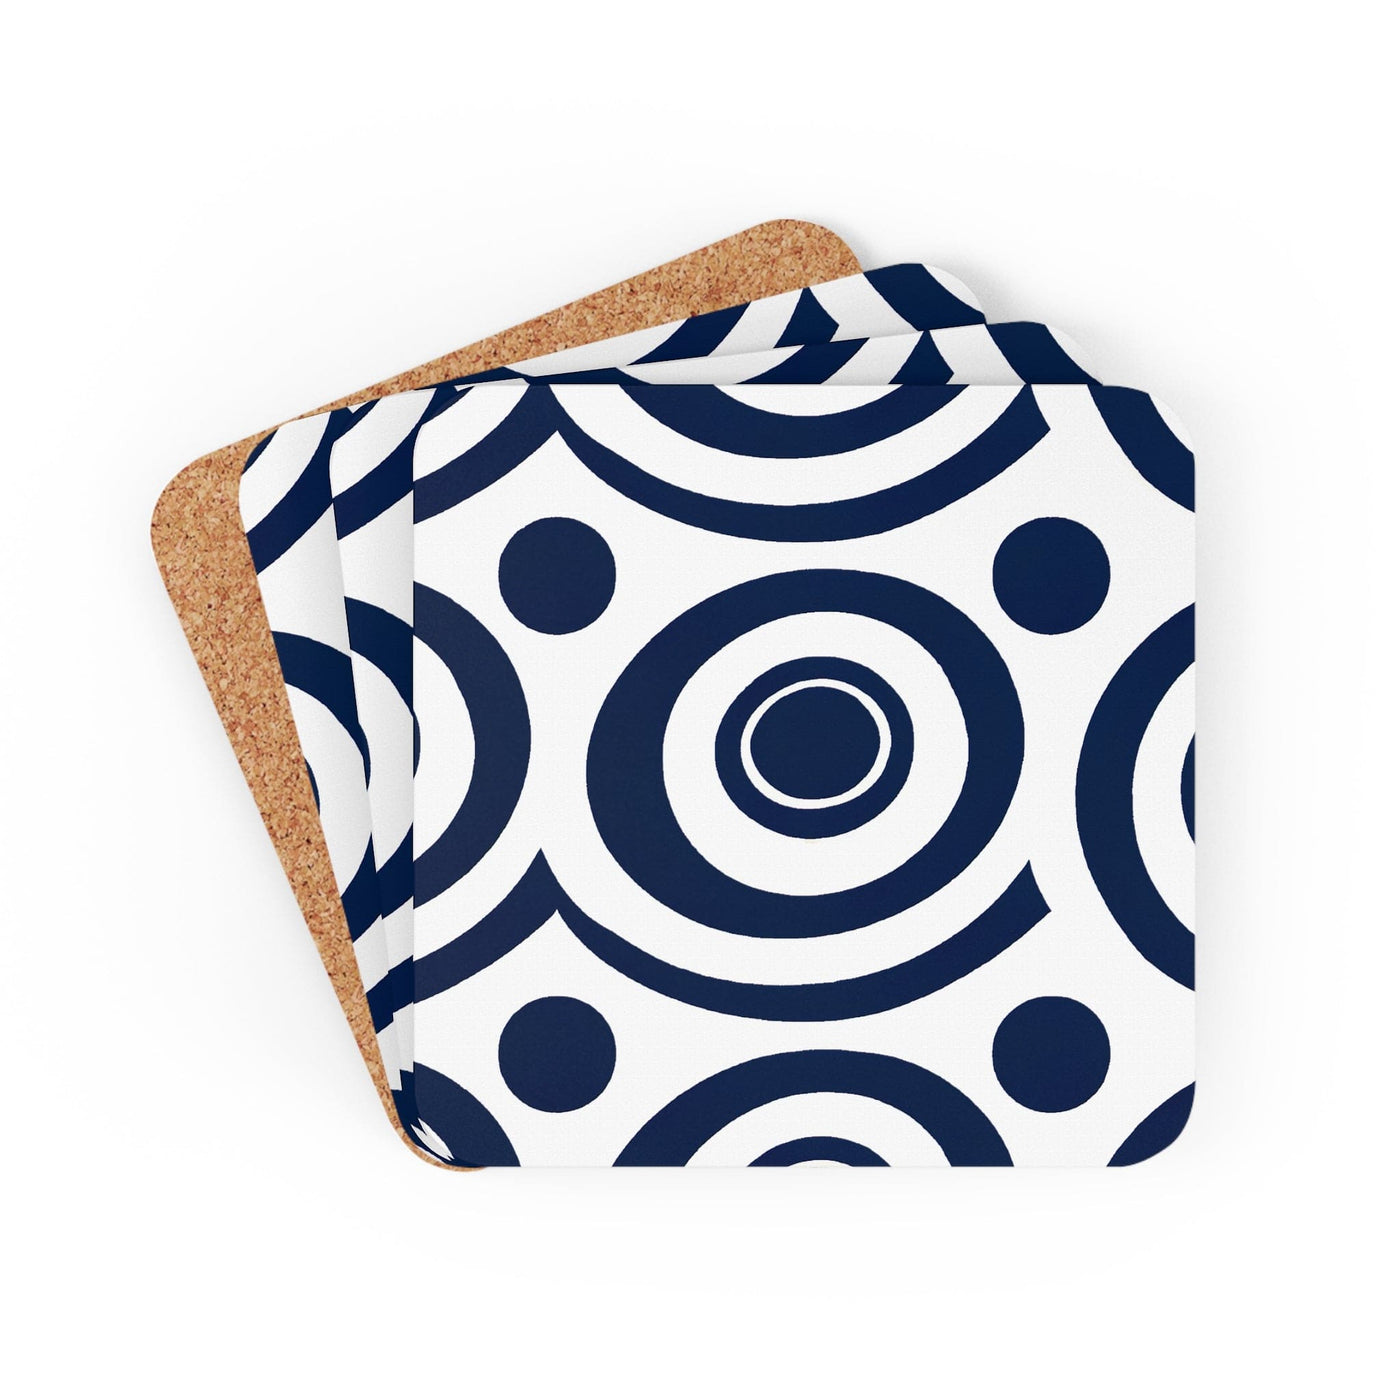 Coaster Set Of 4 For Drinks Navy Blue And White Circular Pattern - Decorative